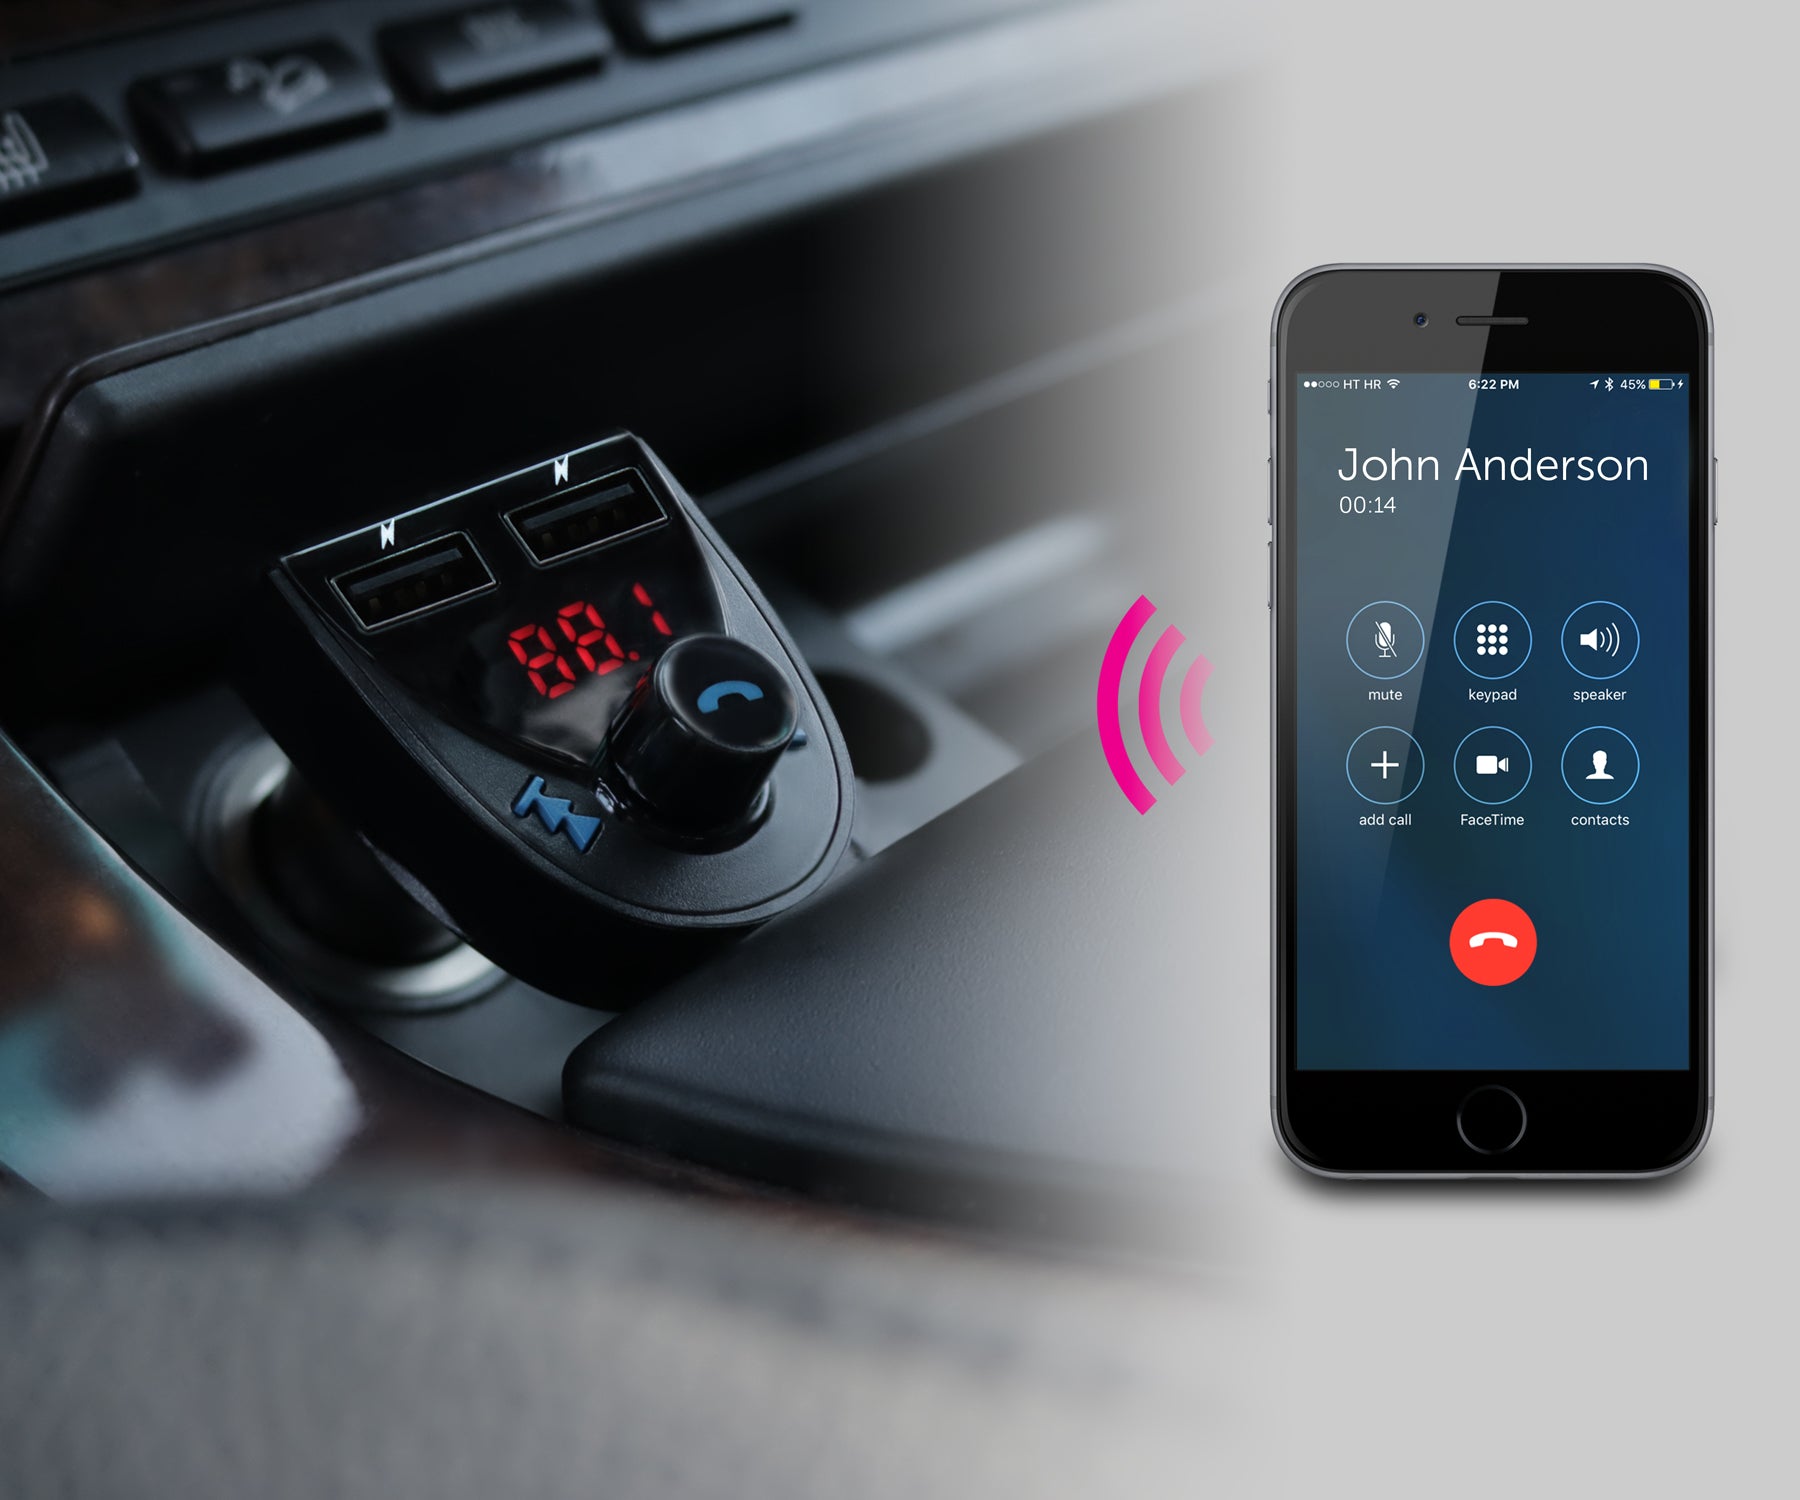 Bluetooth Audio Receiver and FM Transmitter